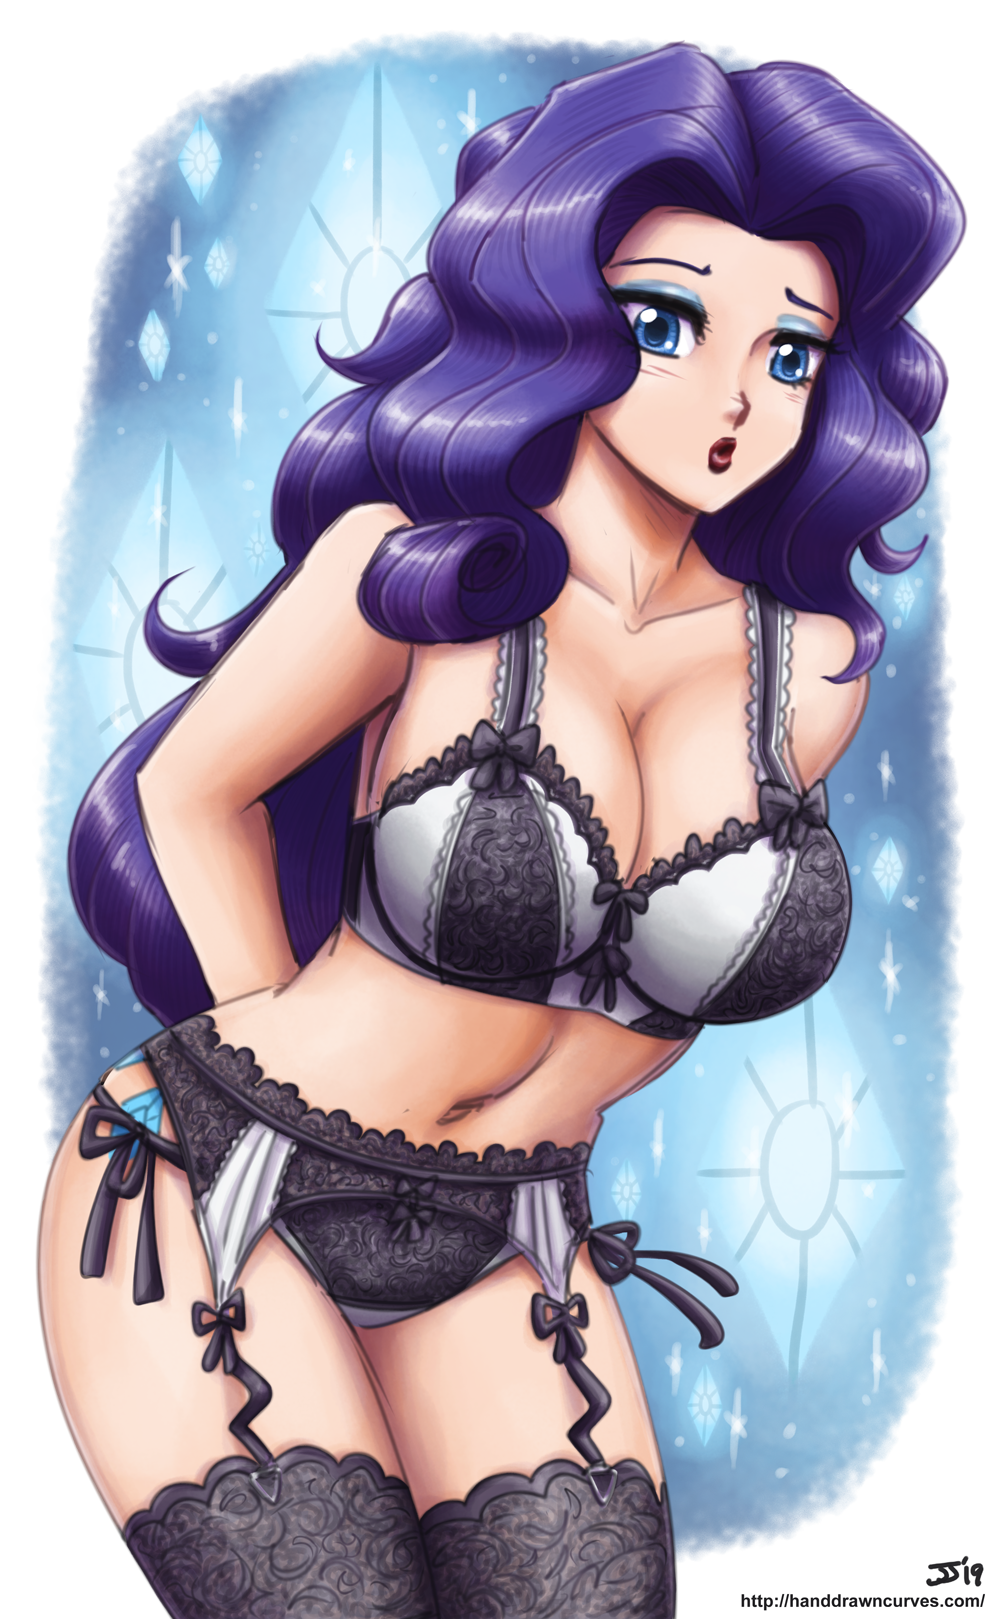 Braeburn in lingerie 2295373 Suggestive Artist Johnjoseco Artist King Kakapo Rarity Human Beautiful Beautisexy Belly Button Breasts Busty Rarity Cleavage Clothes Collaboration Colored Female Garter Belt Garters Humanized Lingerarity Lingerie Looking